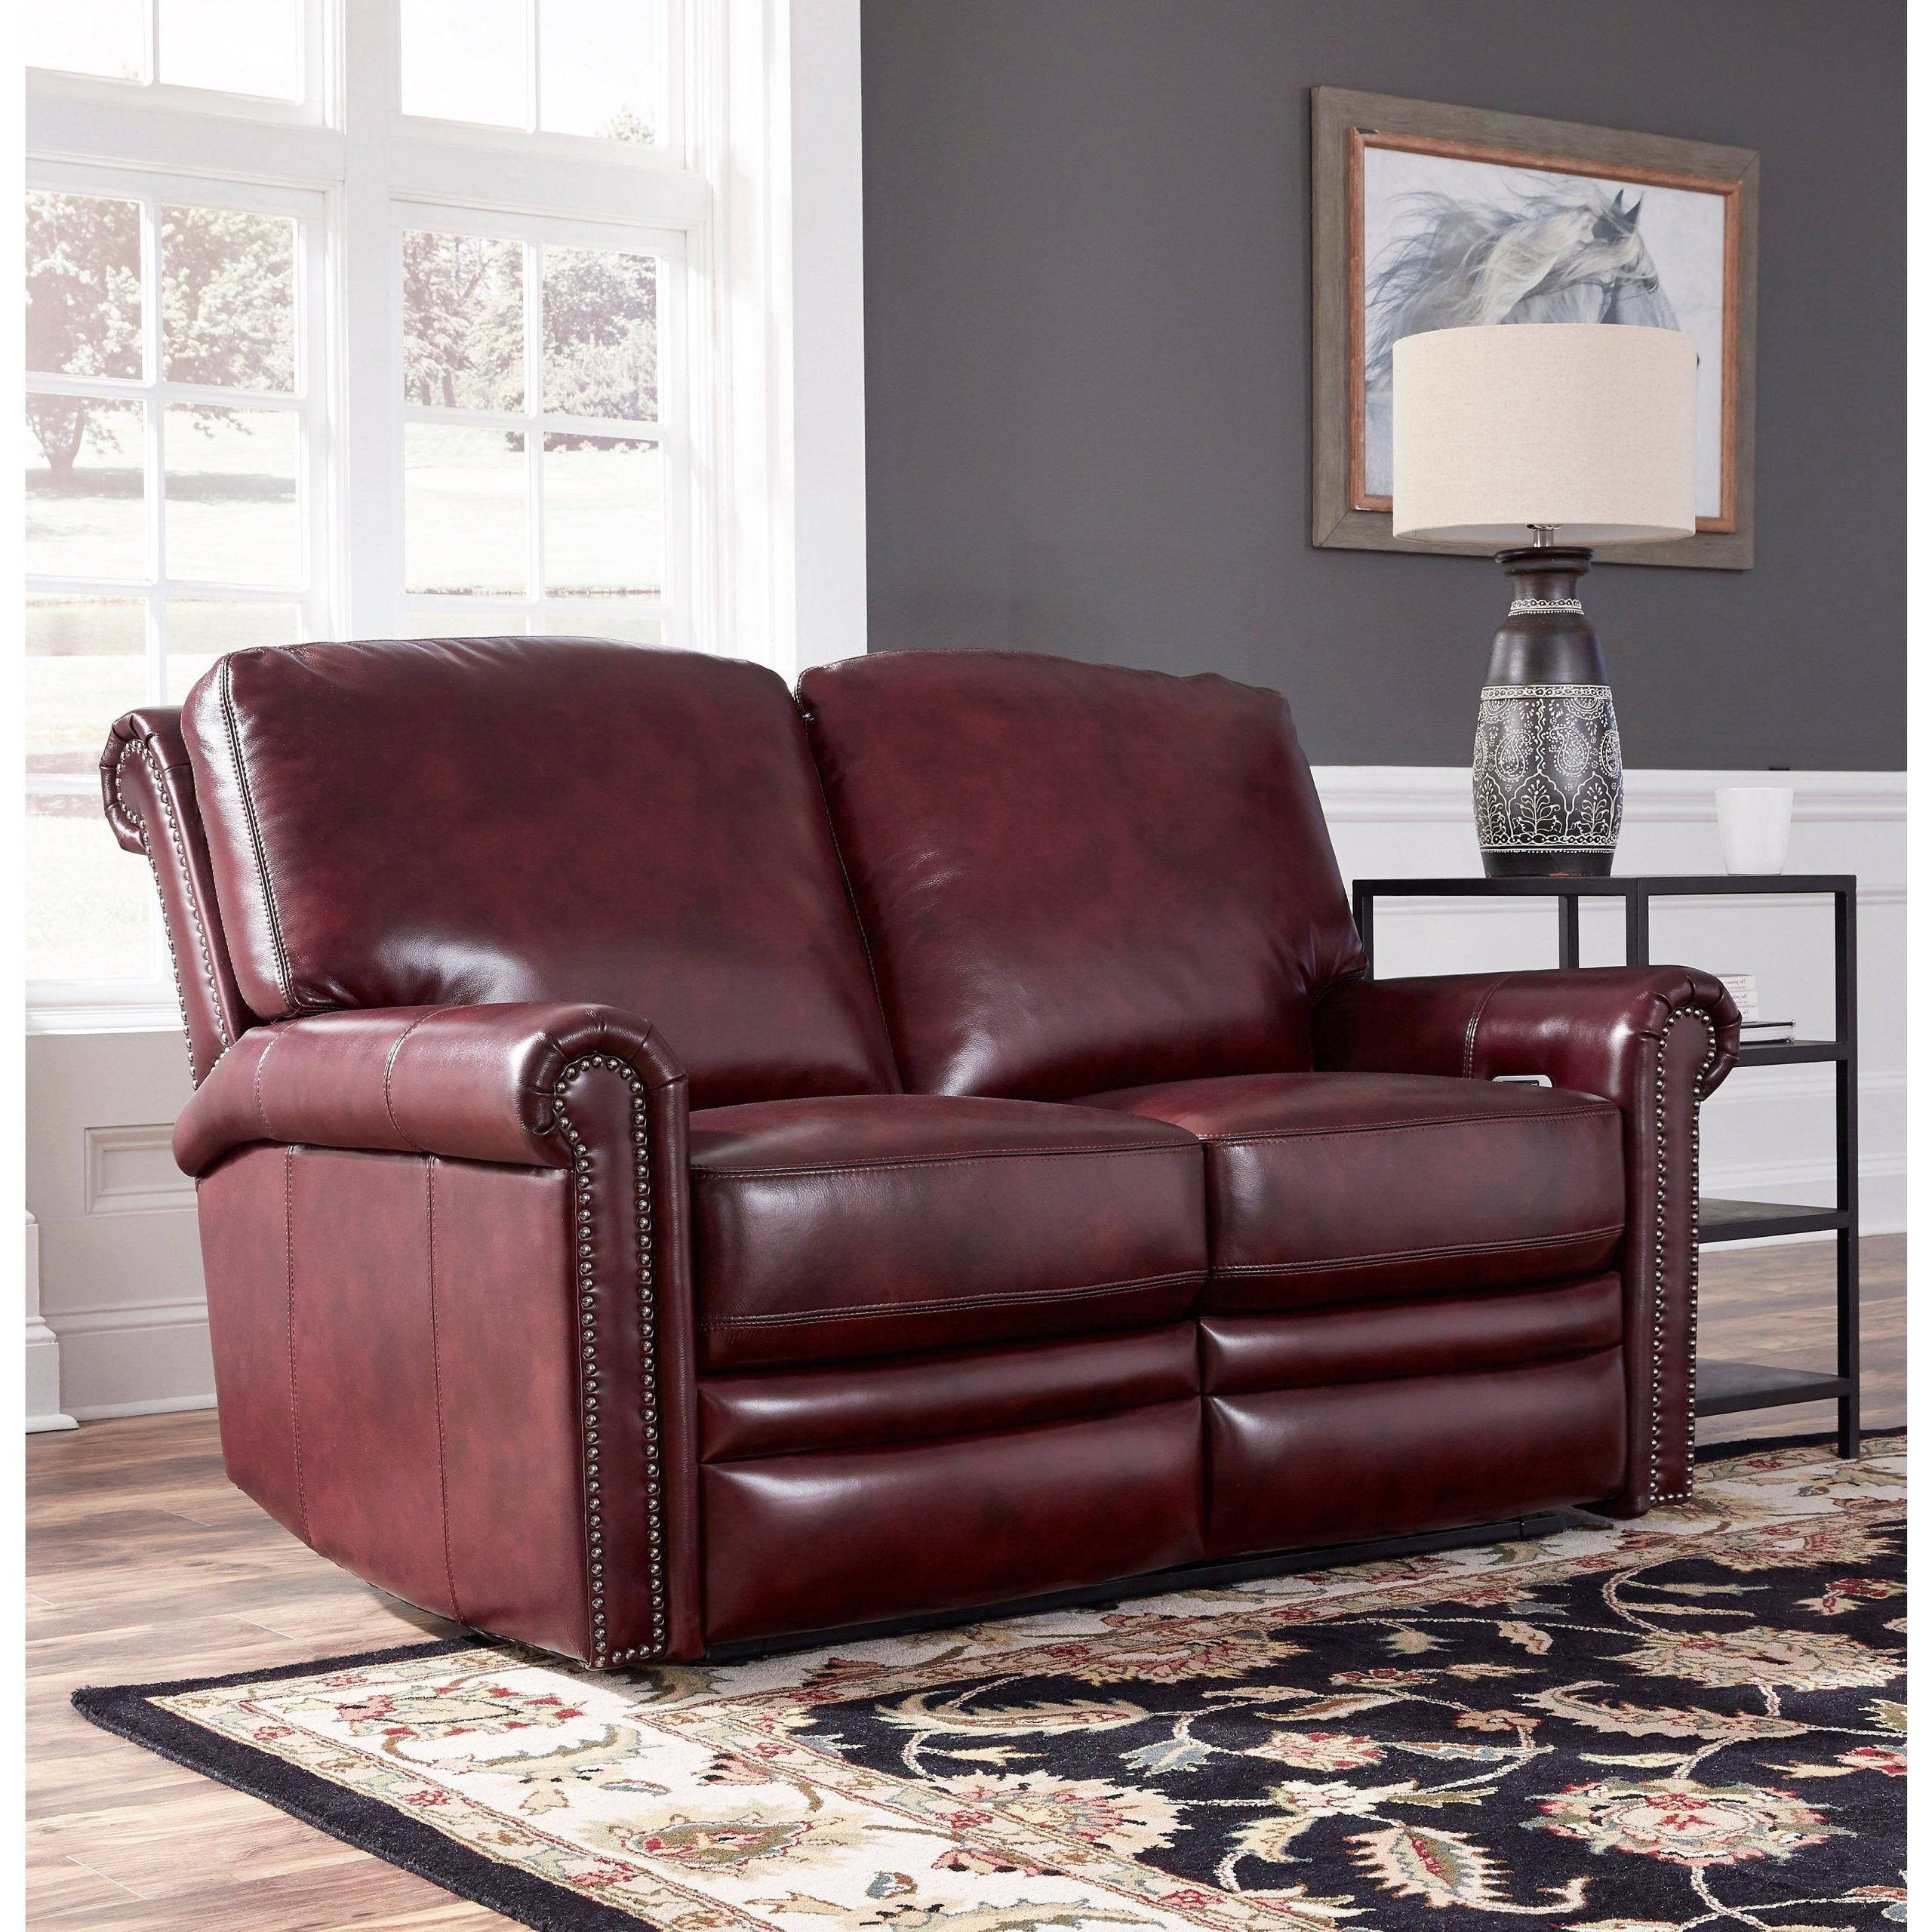 Port Burgundy Red Top Grain Leather Power Reclining Loveseat – Bed Bath Pertaining To Top Grain Leather Loveseats (Gallery 5 of 20)